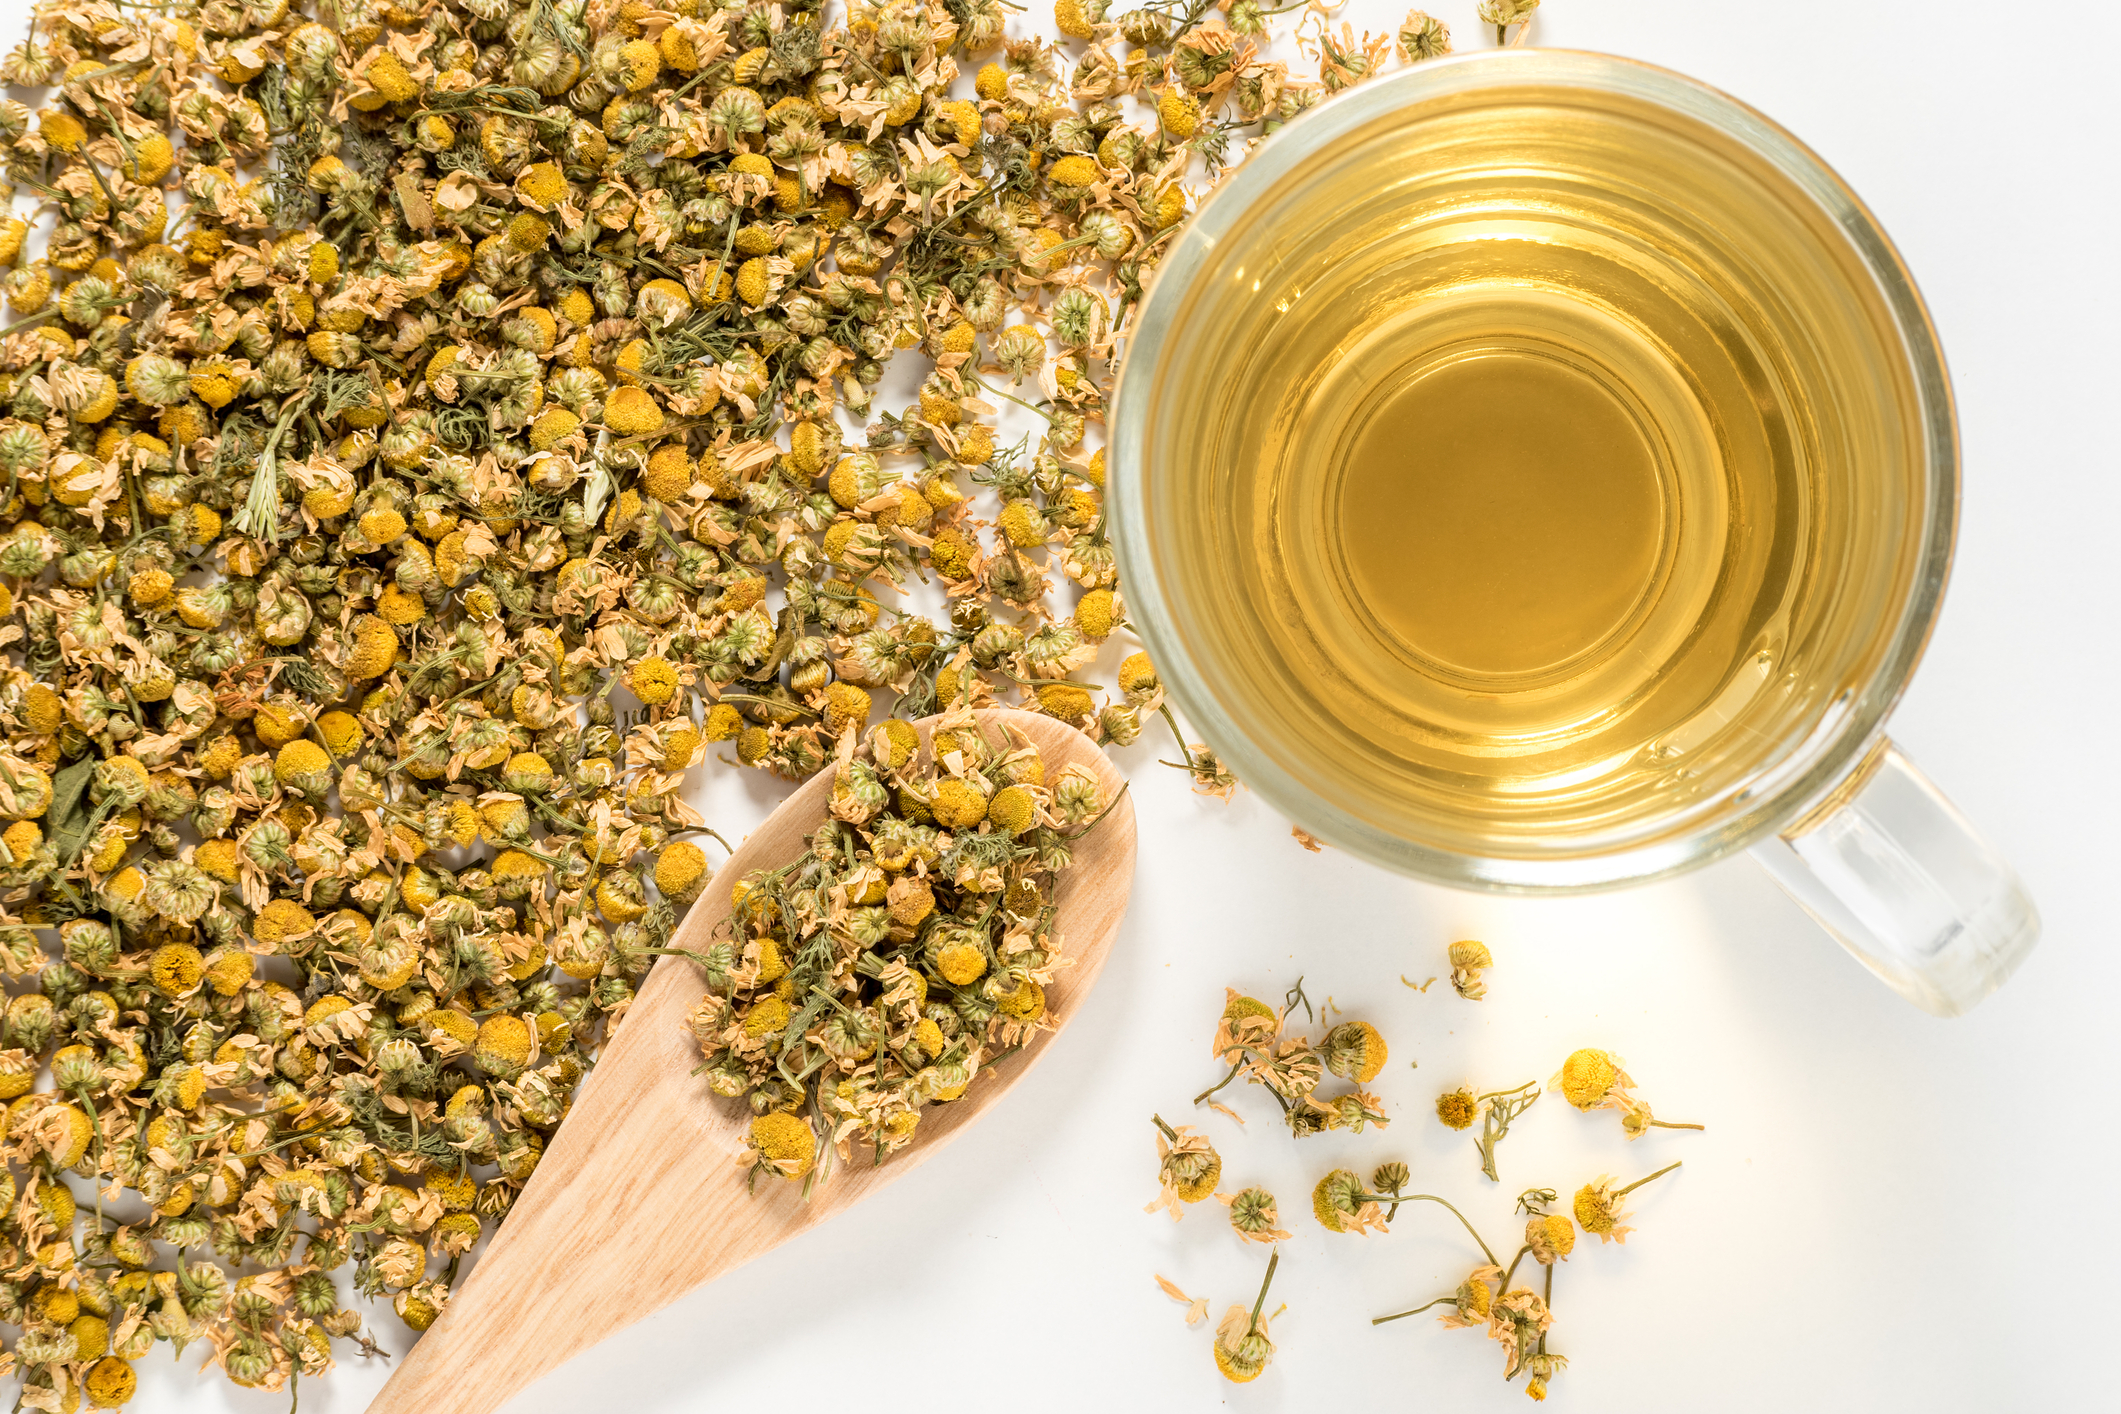 Set your dial to Camomile